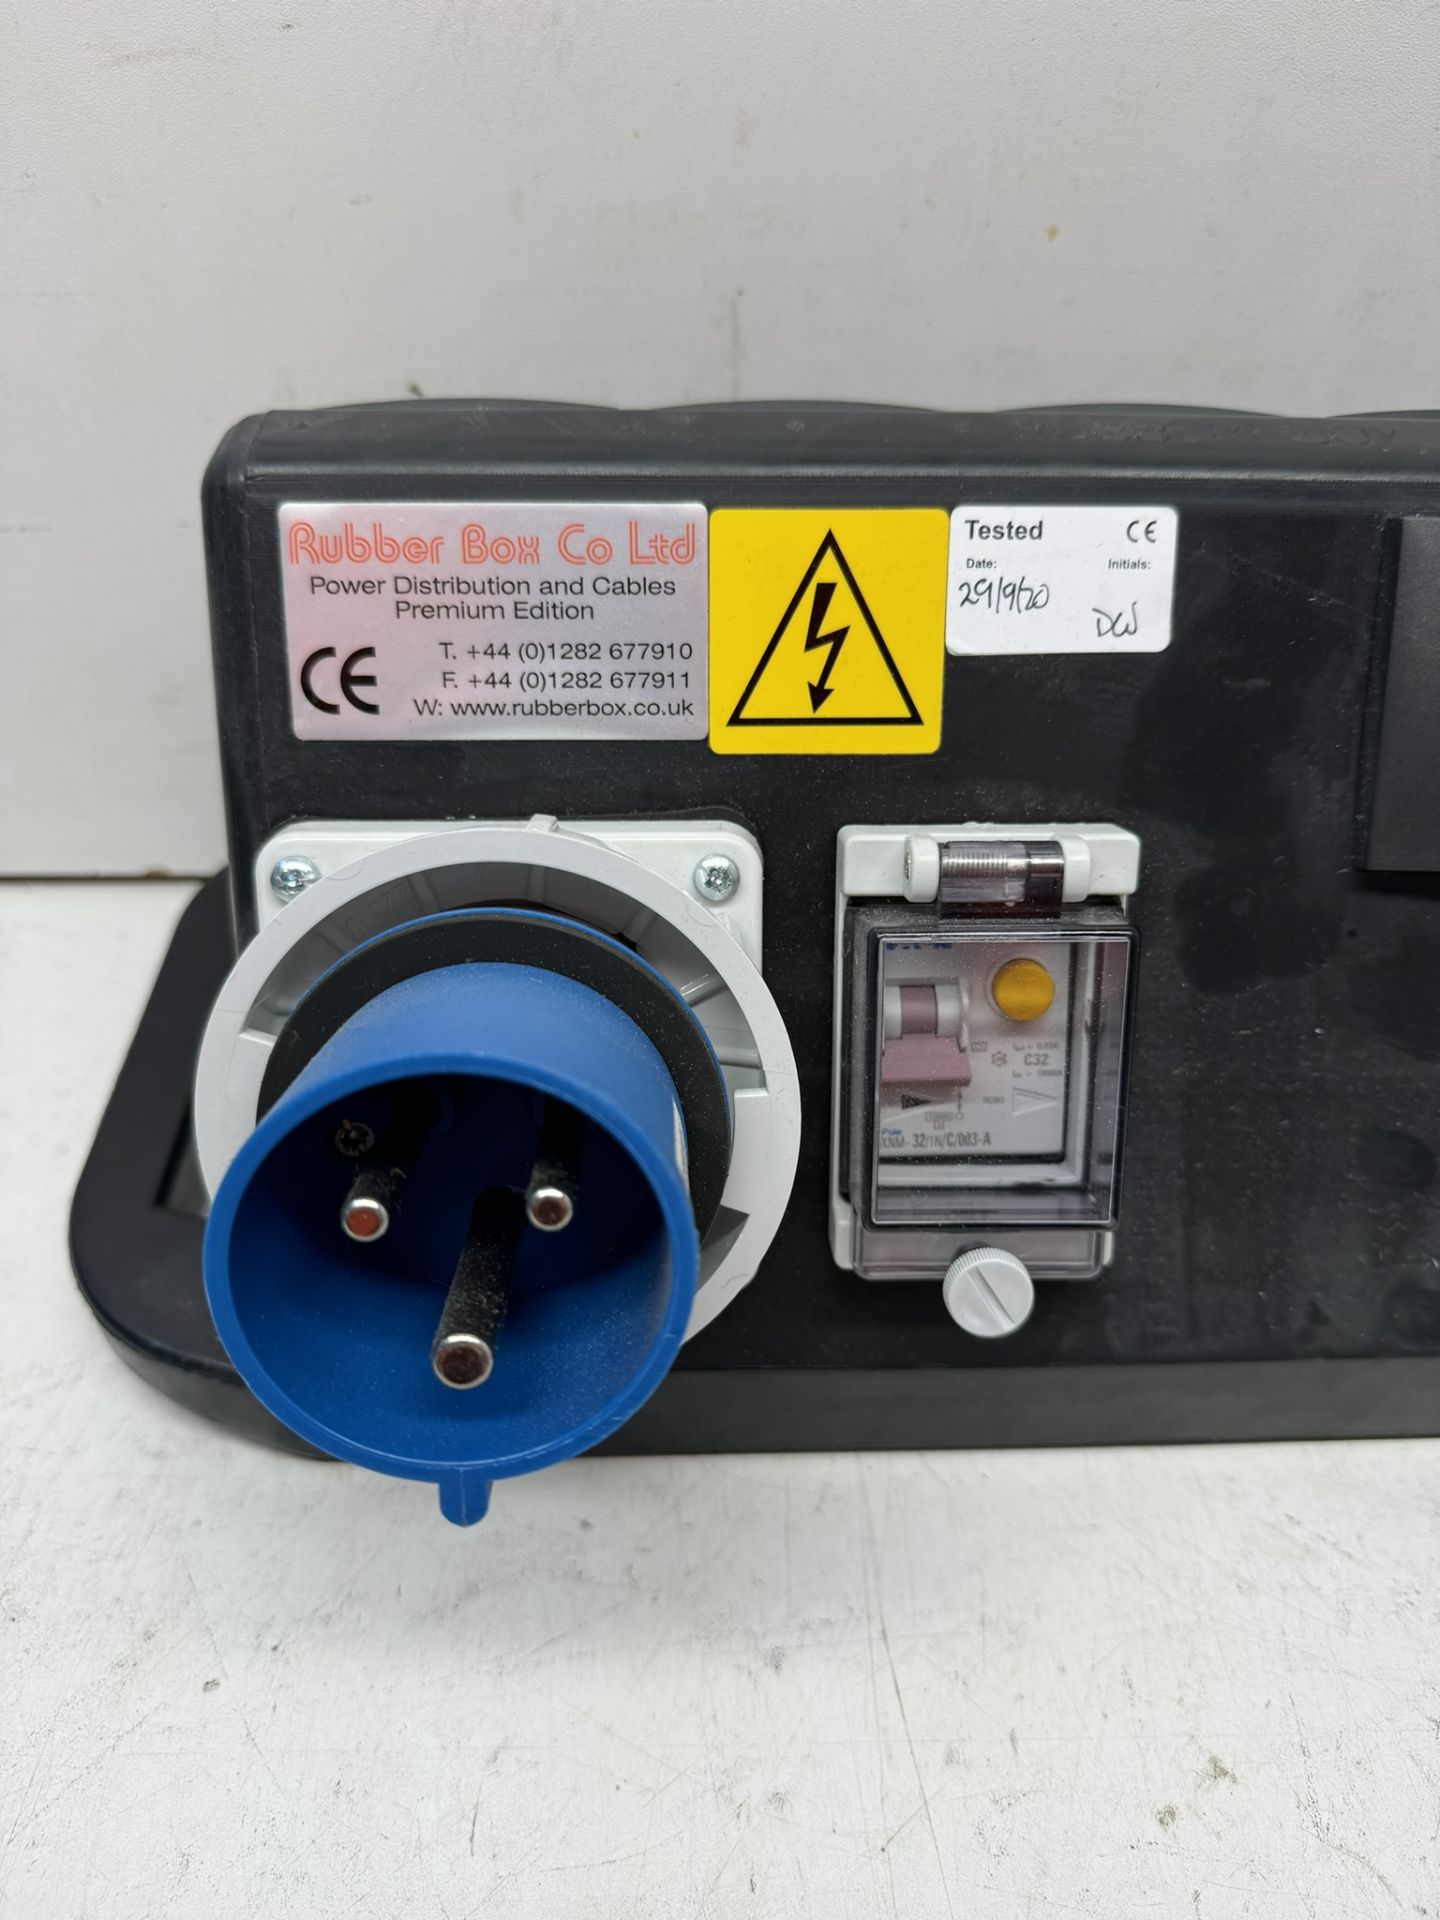 Rubber Box Triangle power distribution Box f/w: 16A 240v In & Out to 14 x 13A 240v Sockets - Image 3 of 4